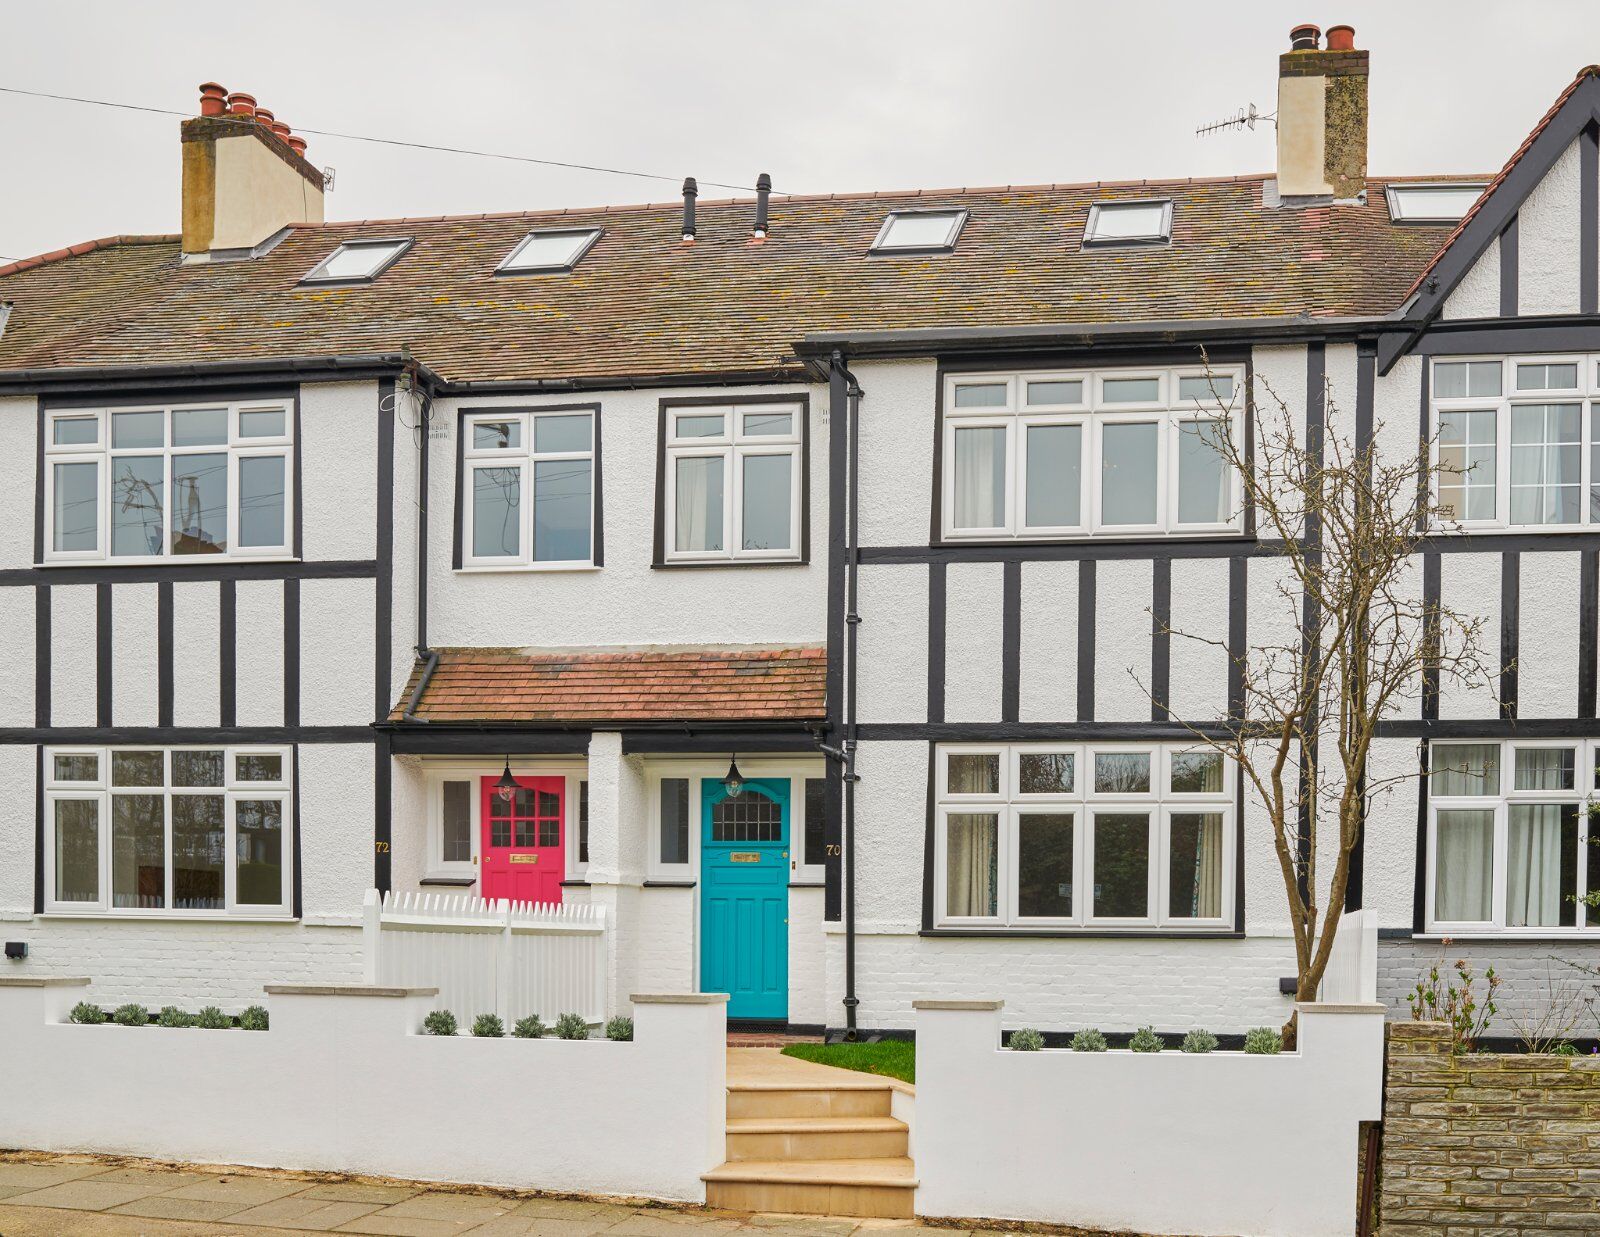 4 bedroom mid terraced house for sale Toynbee Road, Wimbledon, SW20, main image